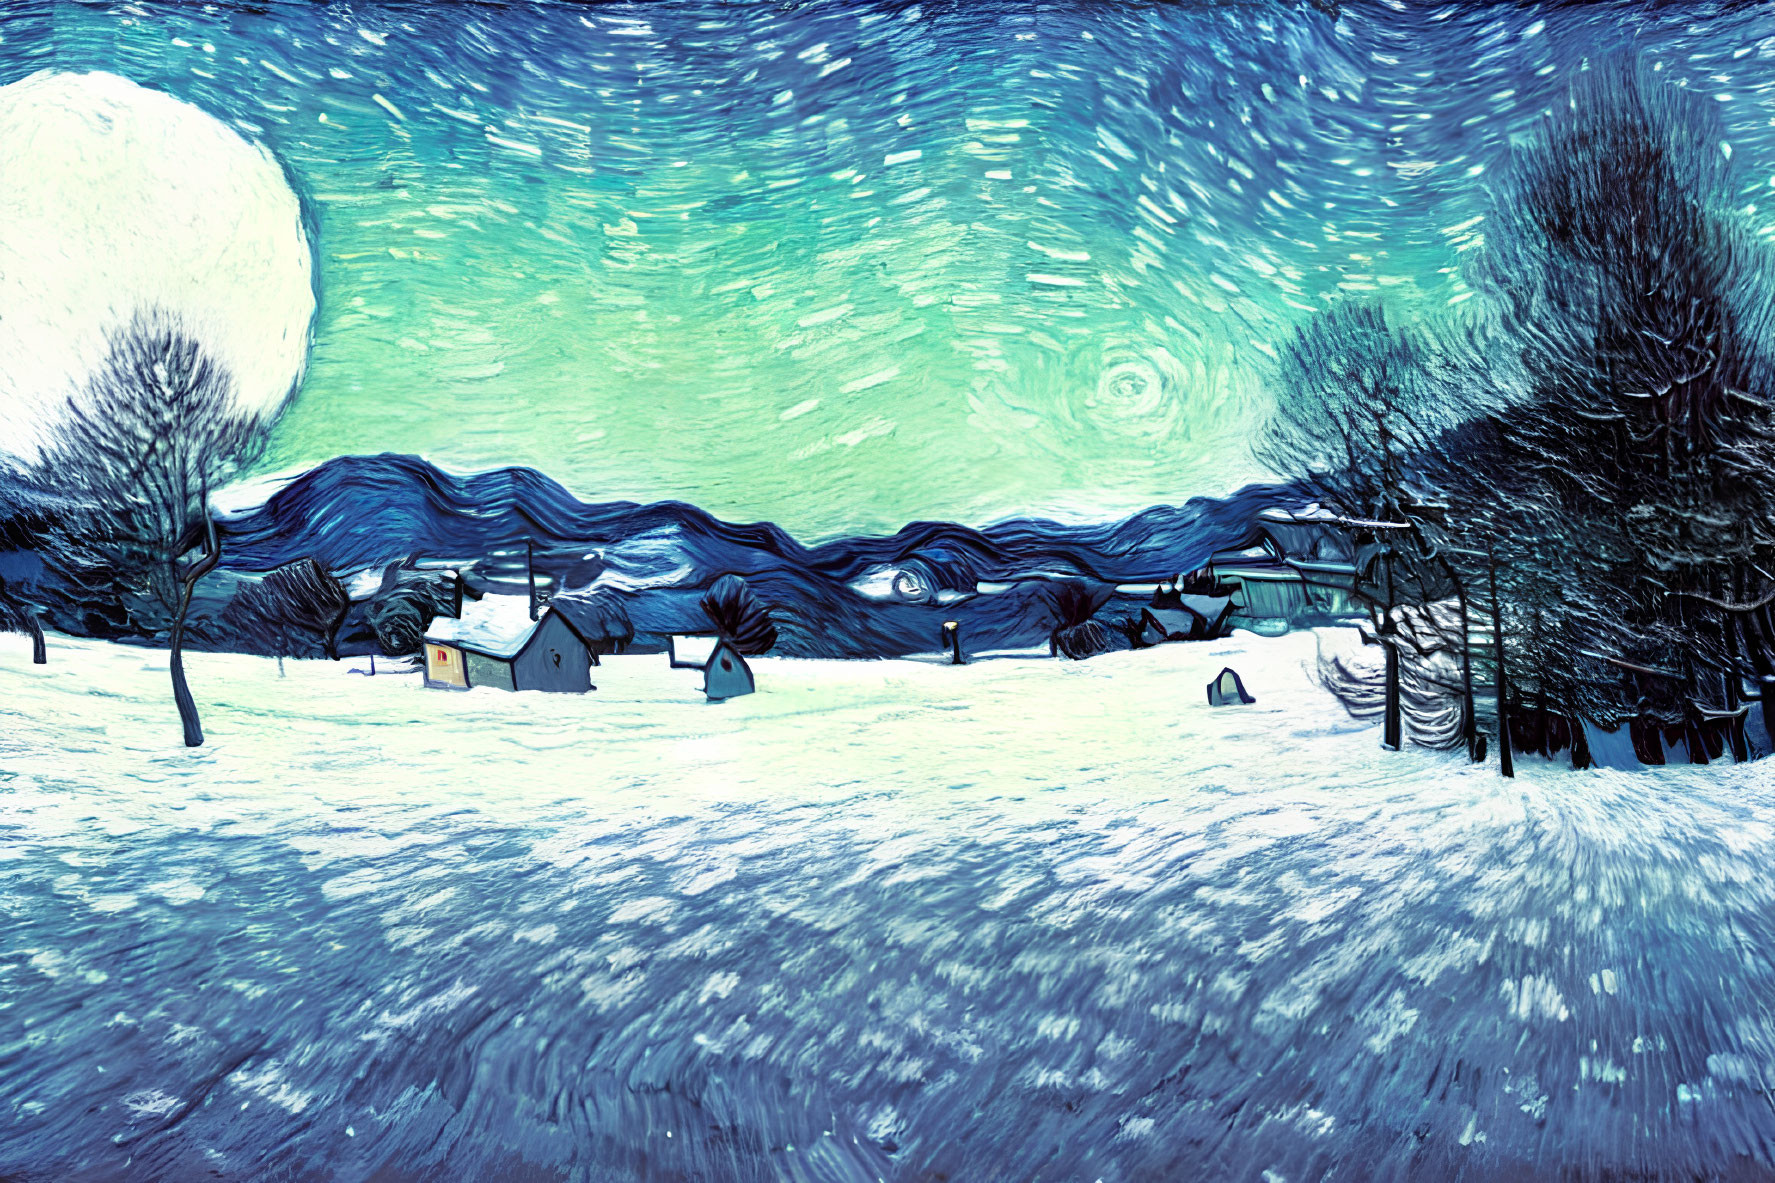 Moonlit snowy landscape with houses and trees and swirling night sky